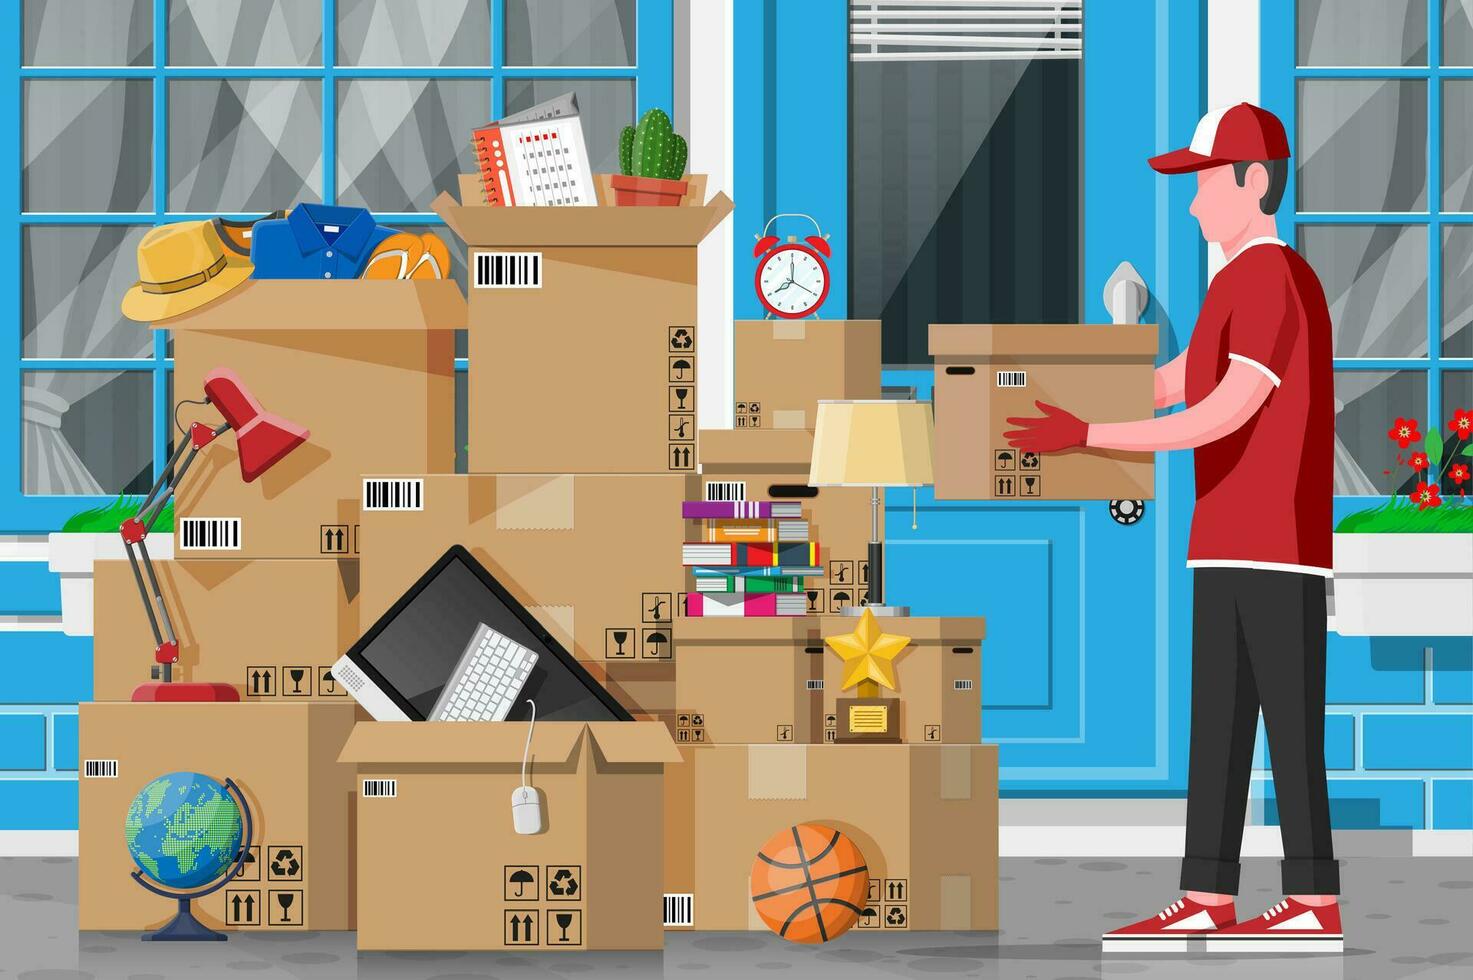 Moving to new house. Family relocated to new home. Male mover, paper cardboard boxes near house facade. Package for transportation. Computer, lamp, clothes, books. Vector illustration in flat style